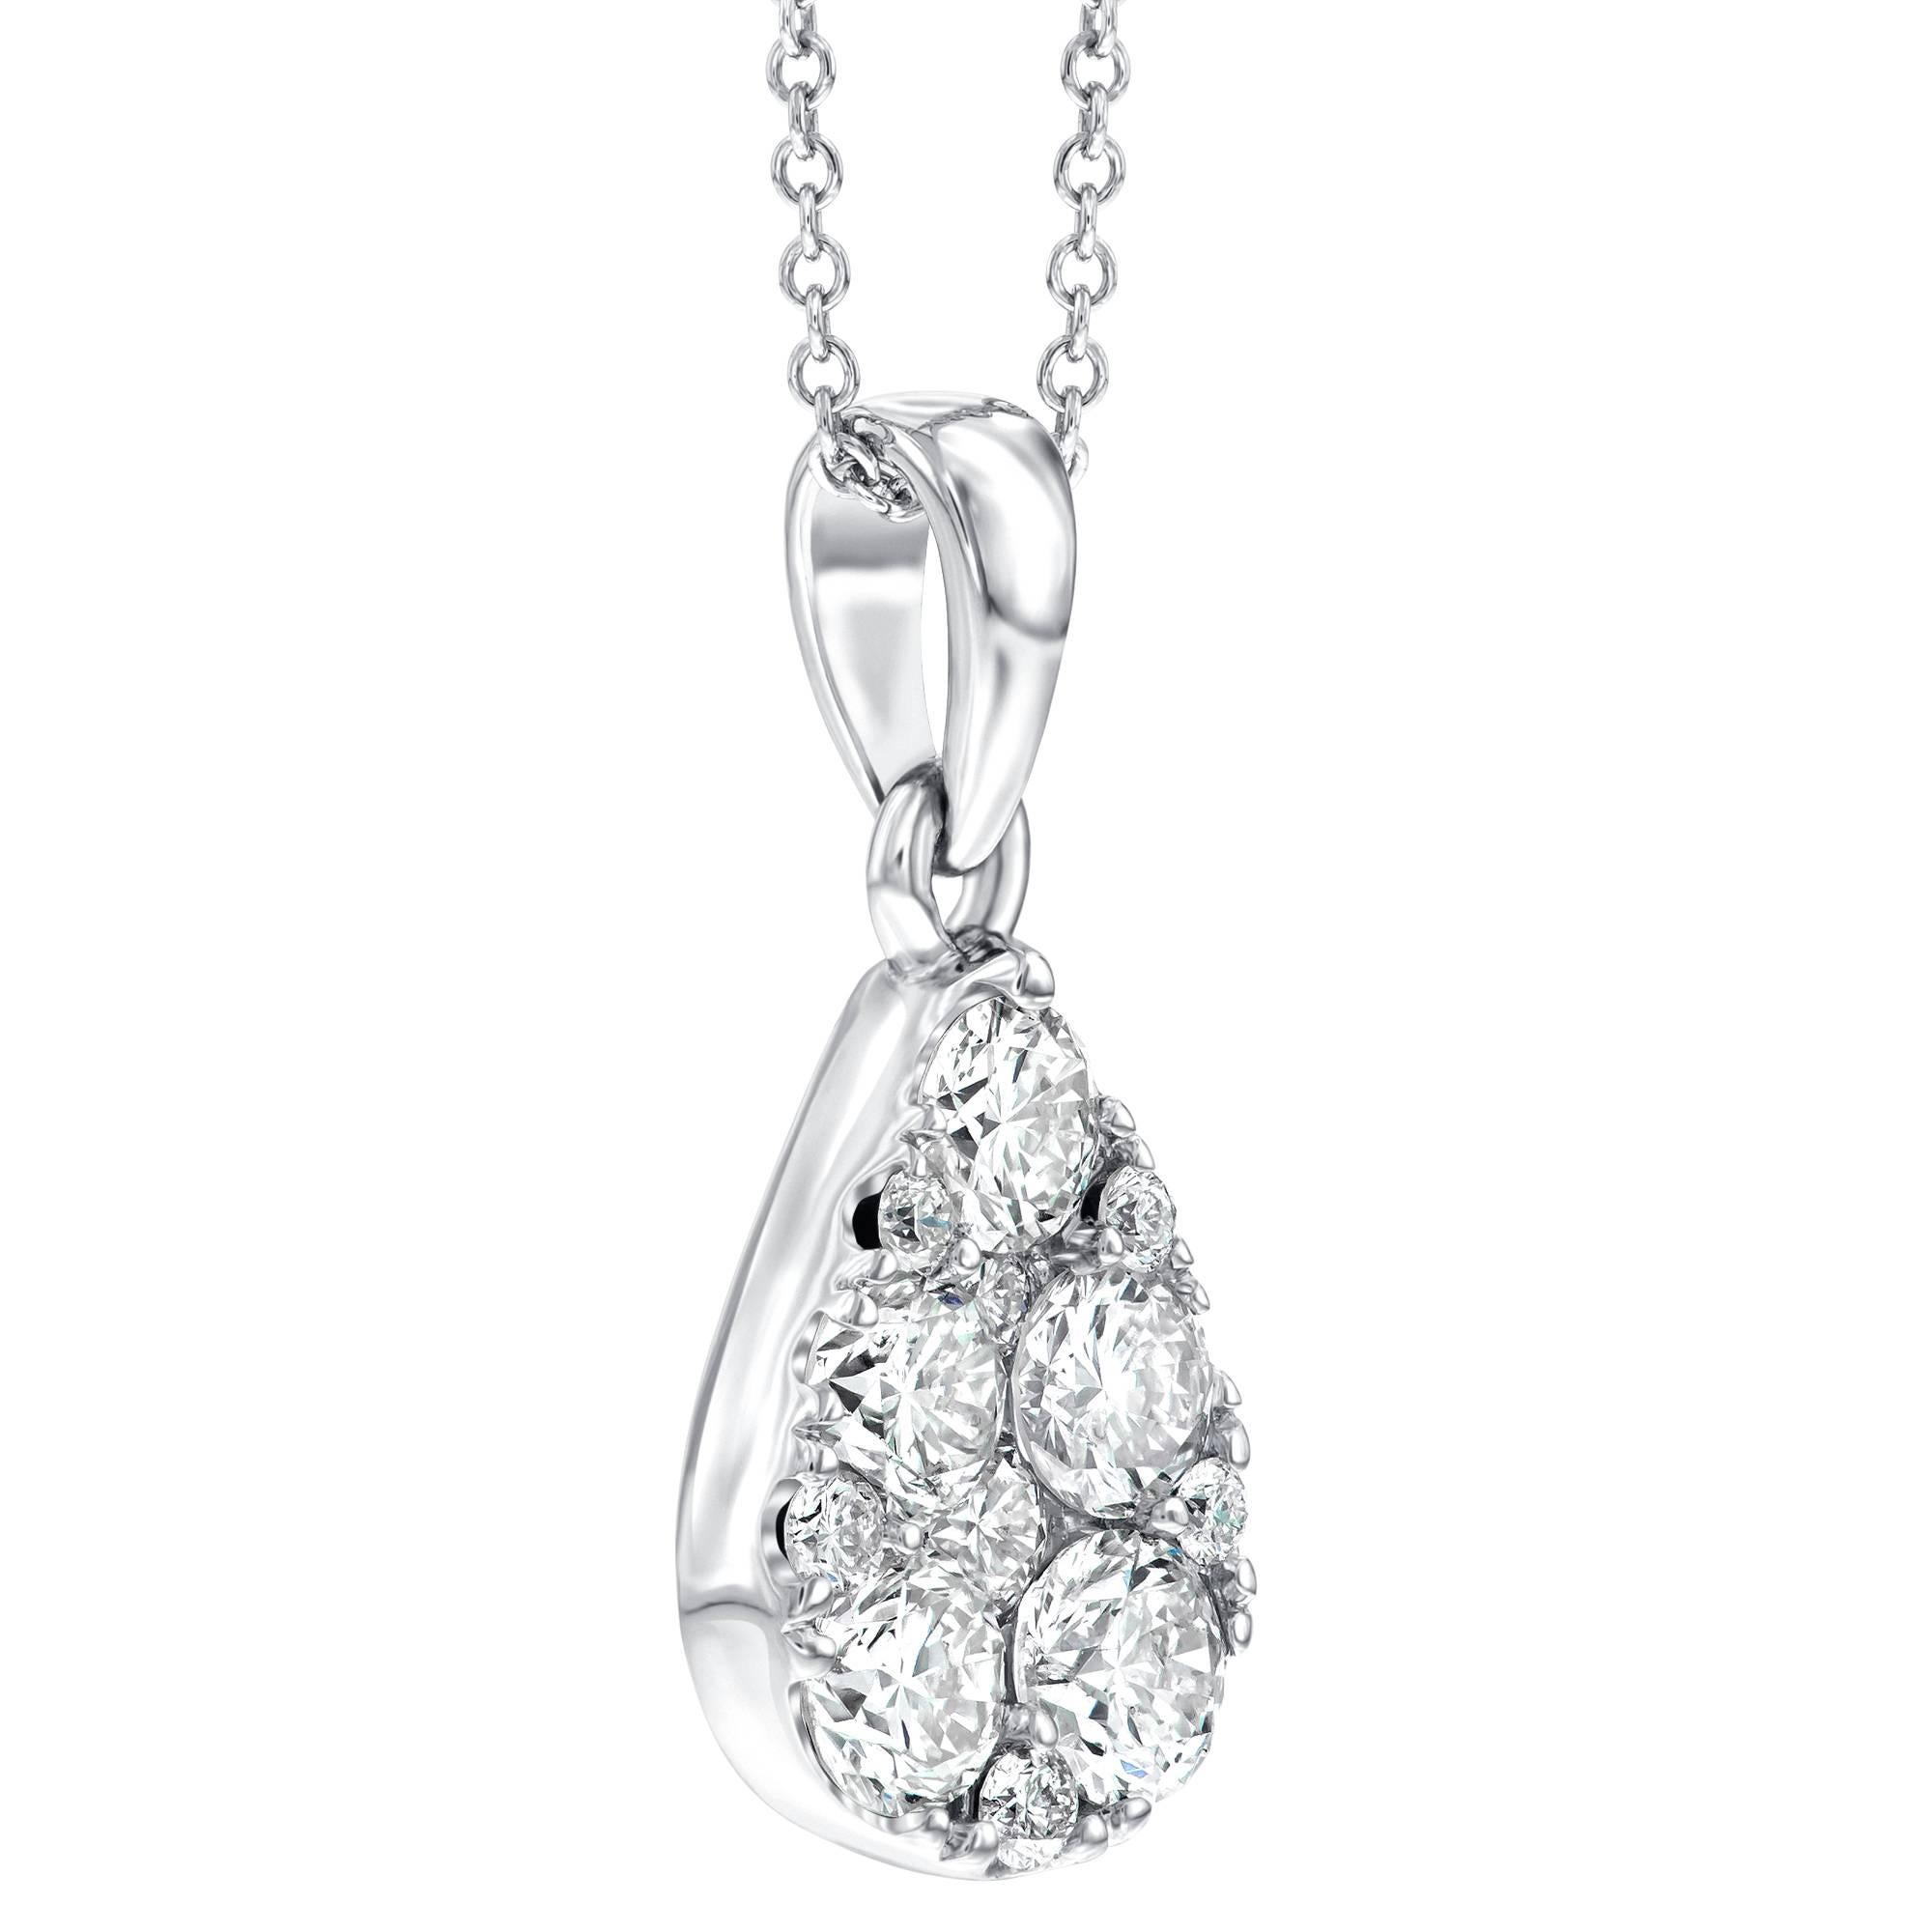 A gorgeous 1.00ct claw set pear shaped pendant, inlaid with various size diamonds this pendant has a unique studded finish that really captures the light. Set in 18ct White Gold which enhances the brilliance of the H-SI white diamonds. This pendant